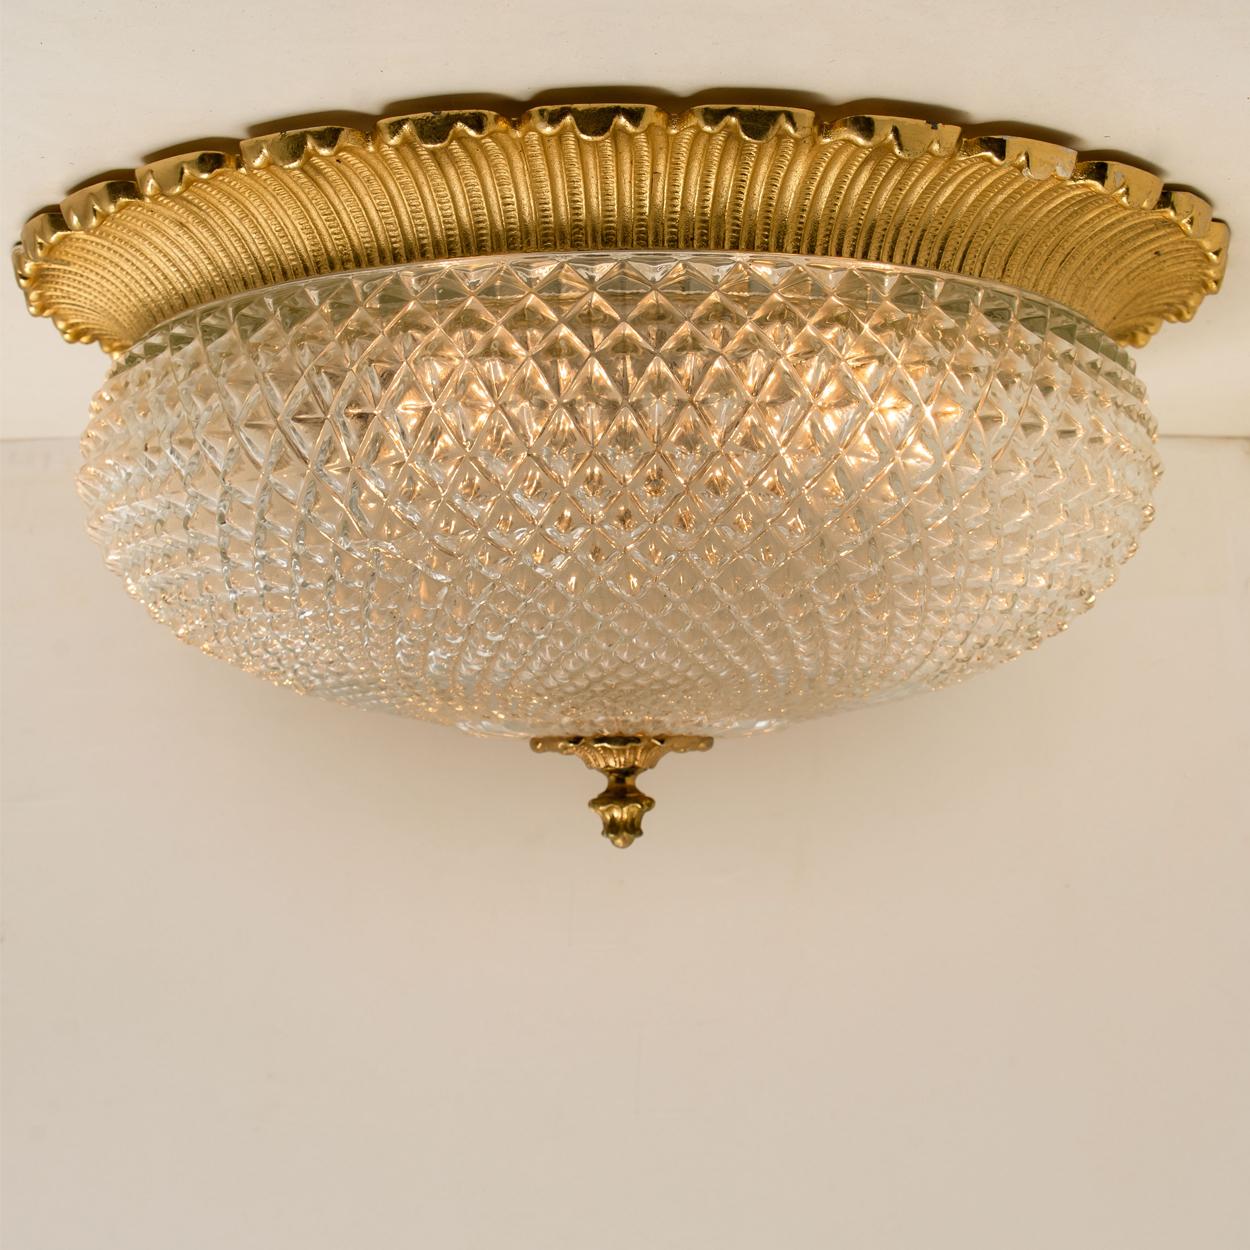 A glass flushmount by Limburg in Germany, 1970s. High-end pieces. Thick textured glass fixture on a brass metal base.

Measures: Large Ø 19.7